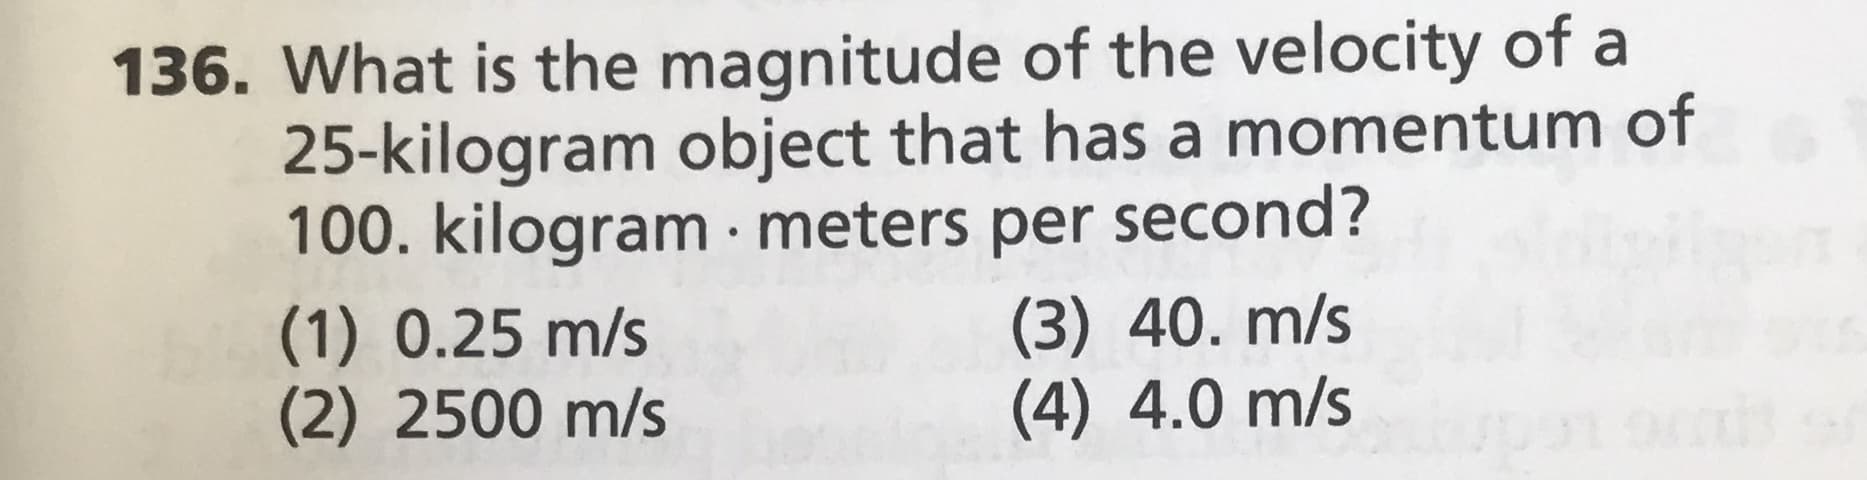 136. What is the magnitude of the velocity of a
25-kilogram object that has a momentum of
100. kilogram · meters per second?
(1) 0.25 m/s
(2) 2500 m/s
(3) 40. m/s
(4) 4.0 m/s
